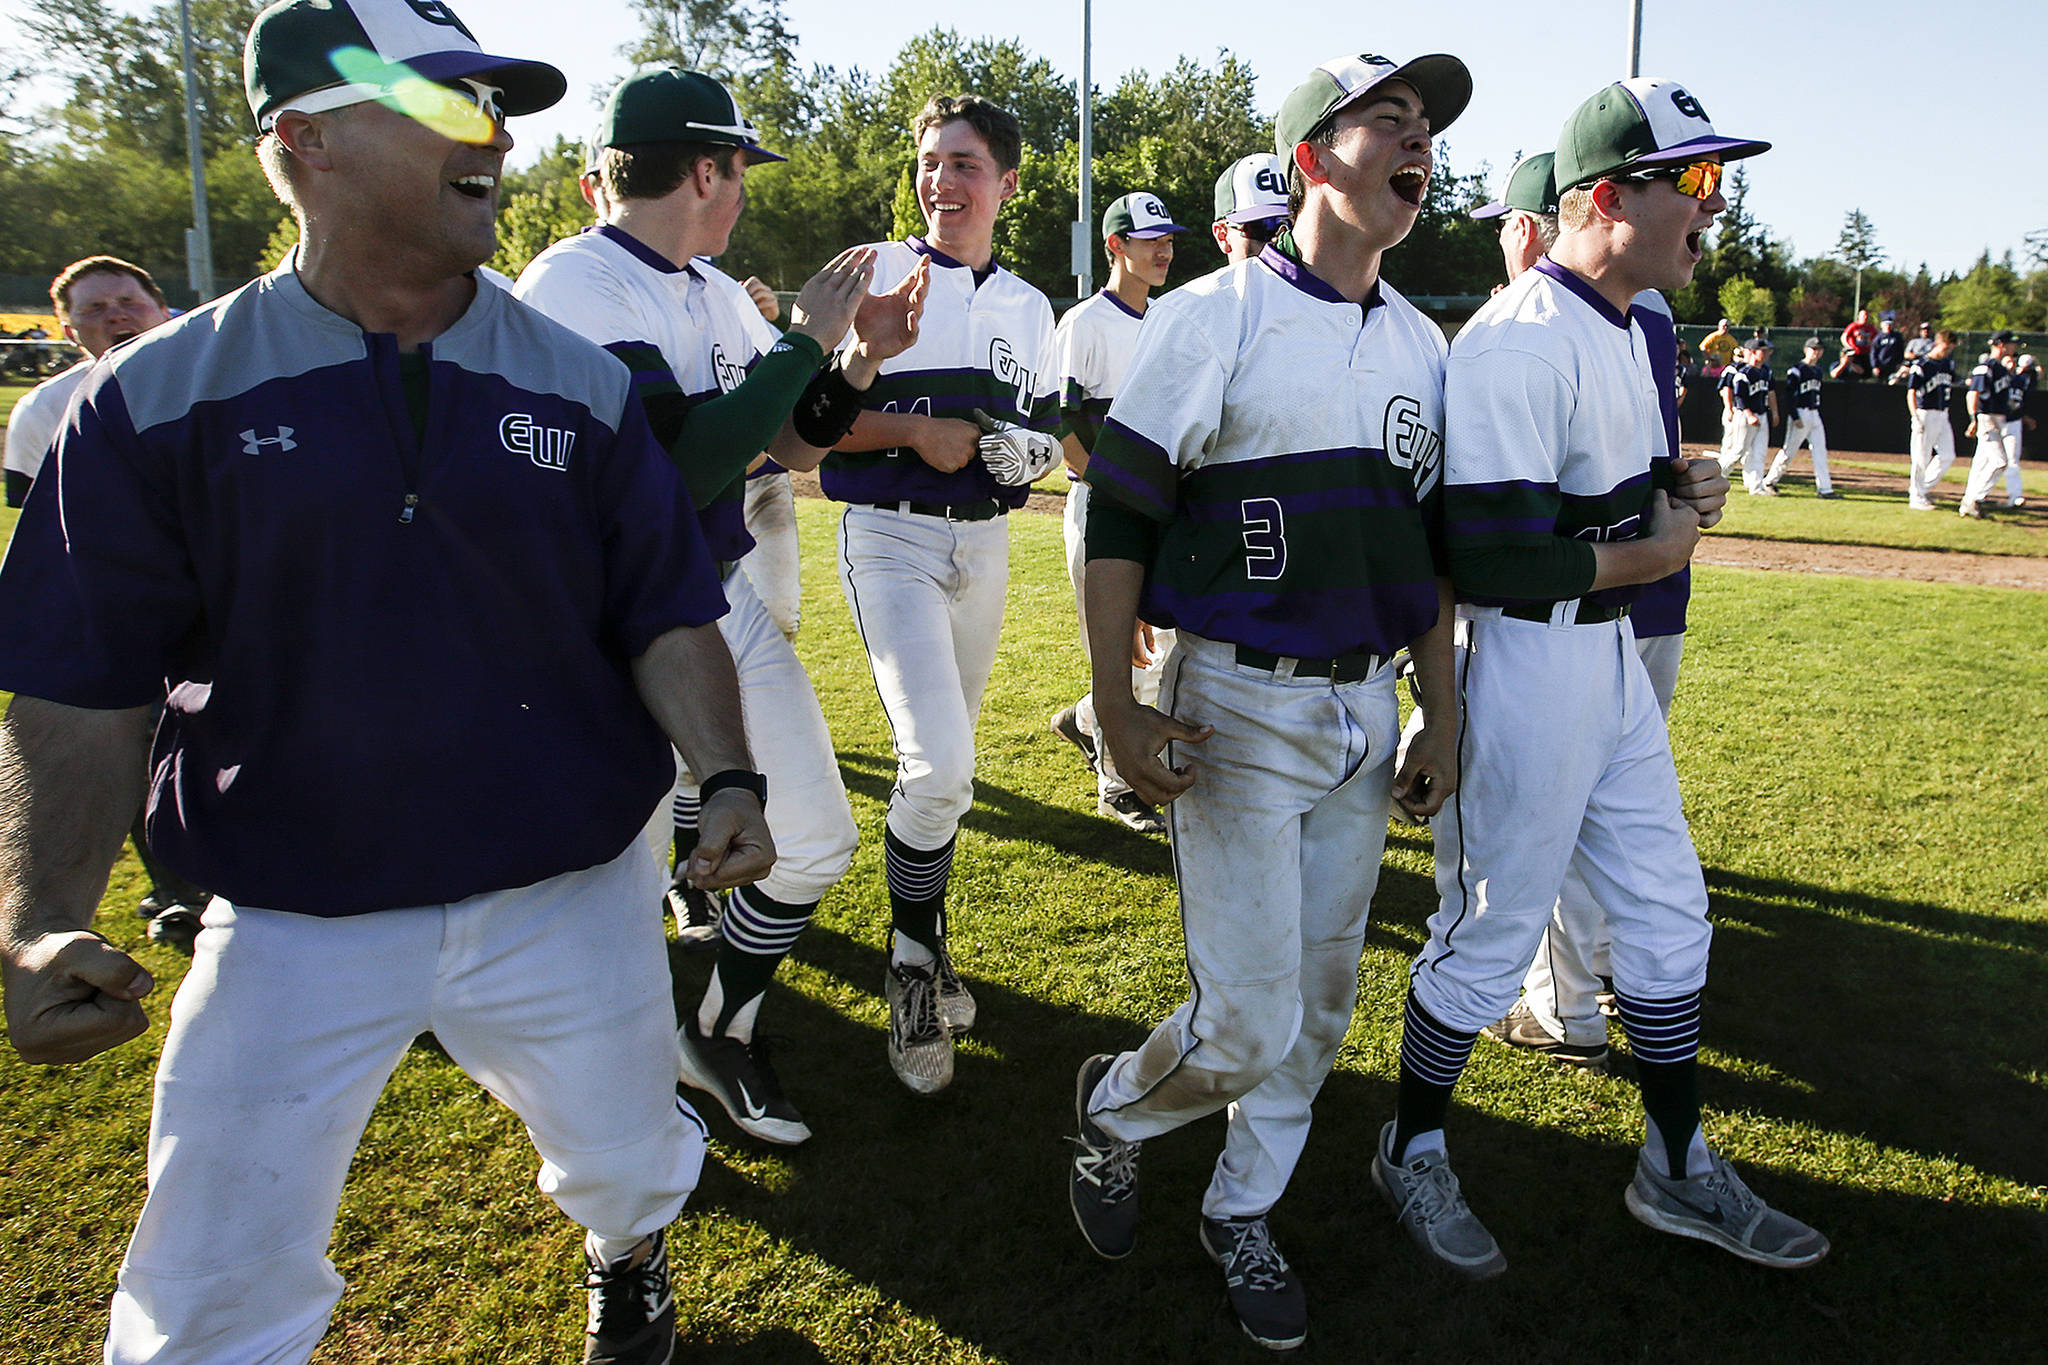 Edmonds-Woodway celebrates its 8-7 victory over Arlington in 10 innings in a 3A state playoff game on May 20, 2017, at Dream Field in Mount Vernon. (Ian Terry / The Herald)